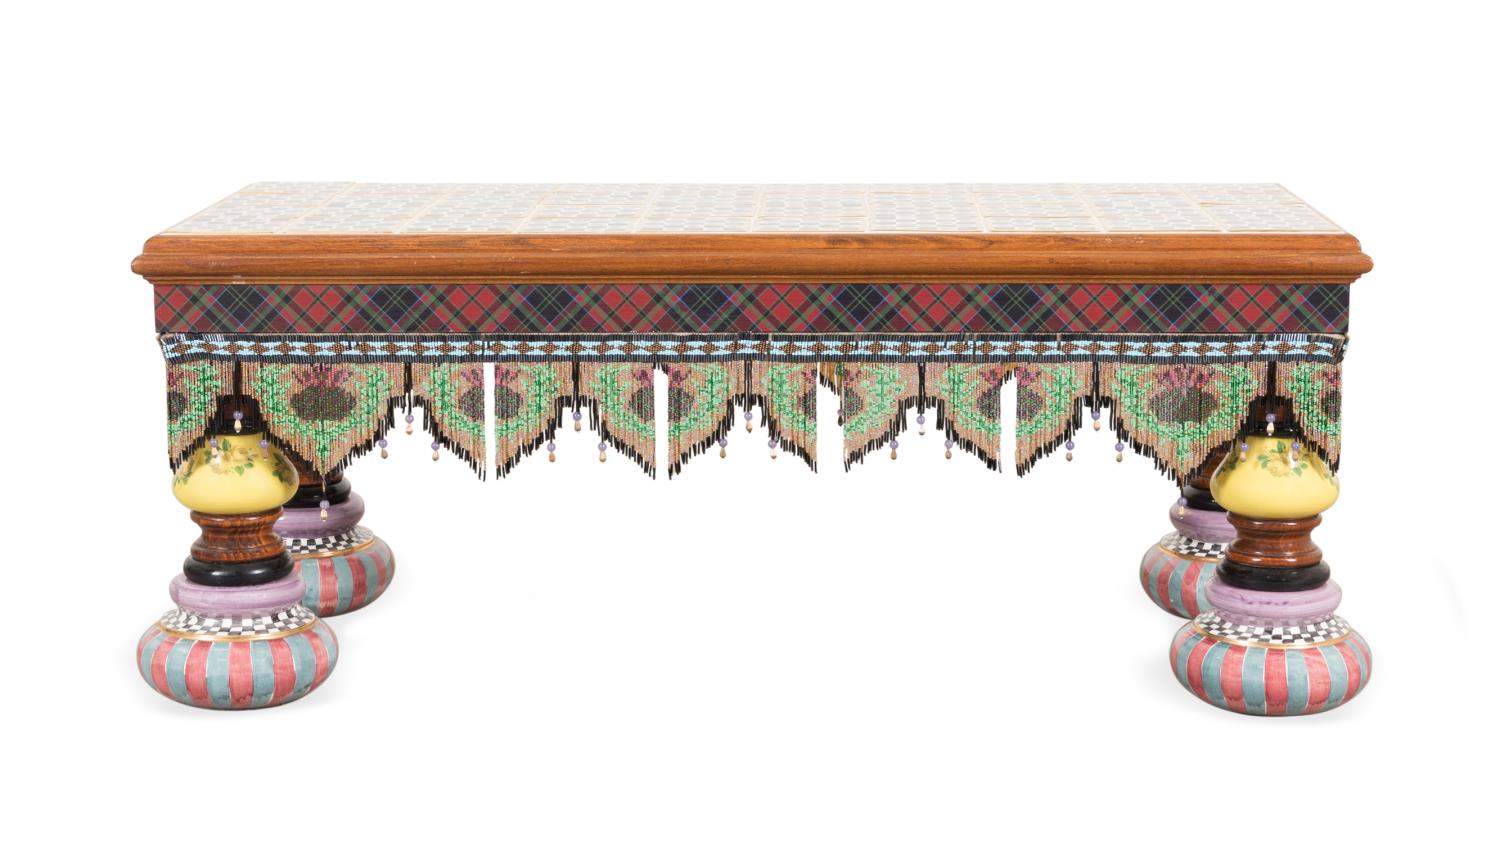 MACKENZIE-CHILDS TILE TOP TABLE